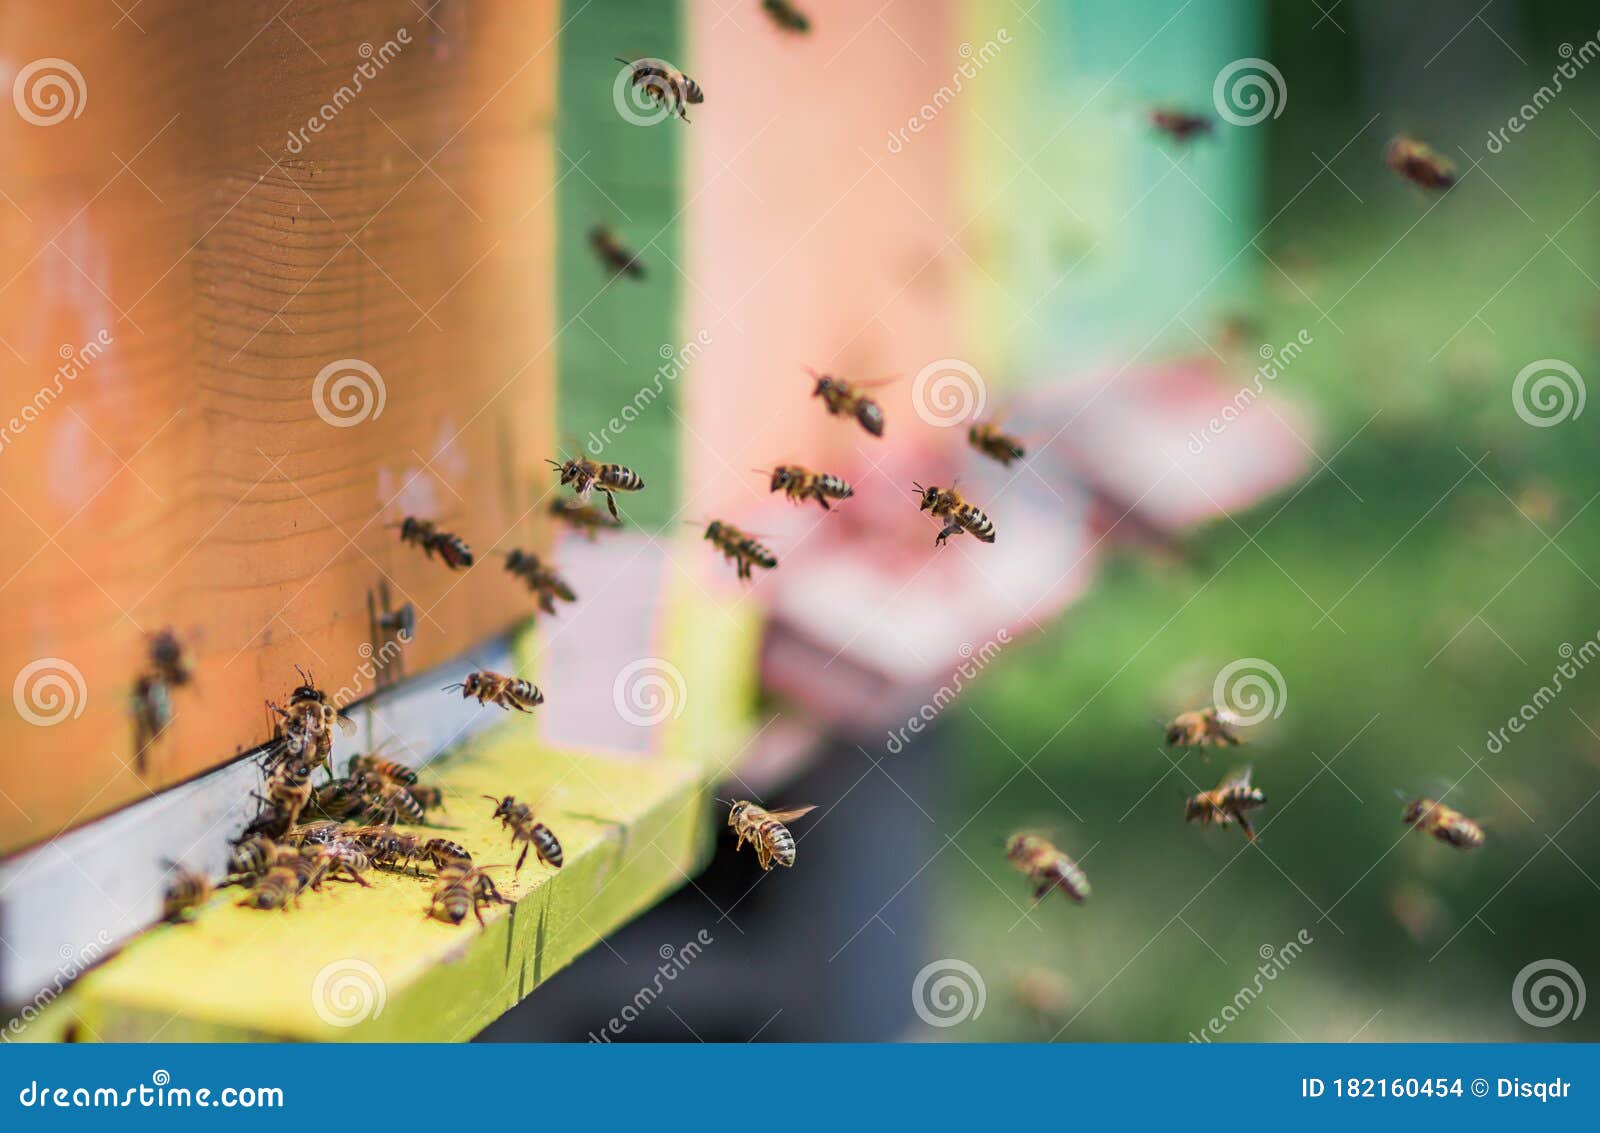 bees flying entering honeycomb bee hive